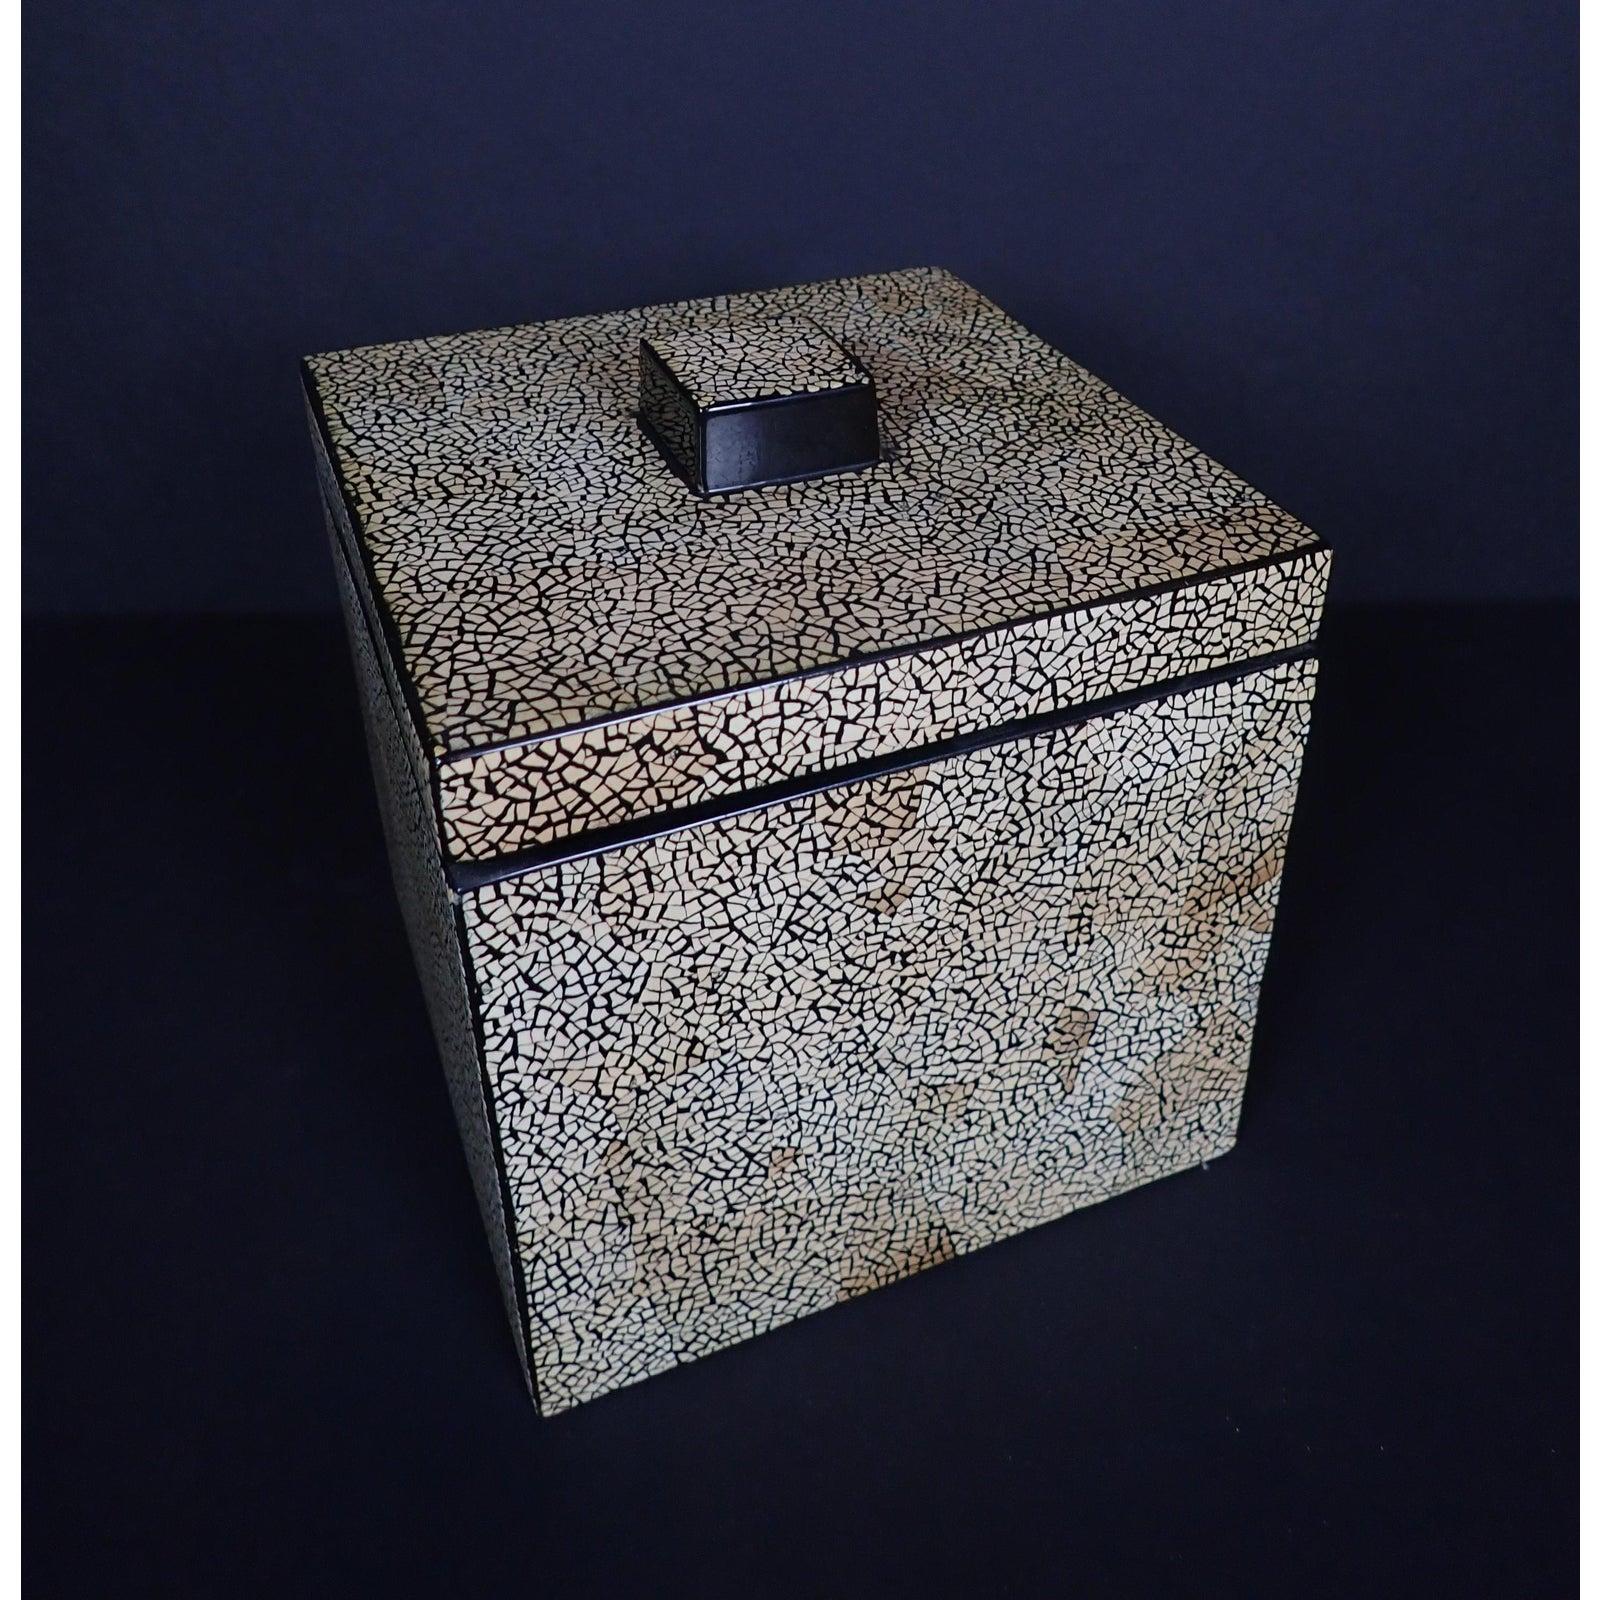 Japanese lidded box. Lacquer with crackleware design. Beautiful ebony and ivory crackle finish.